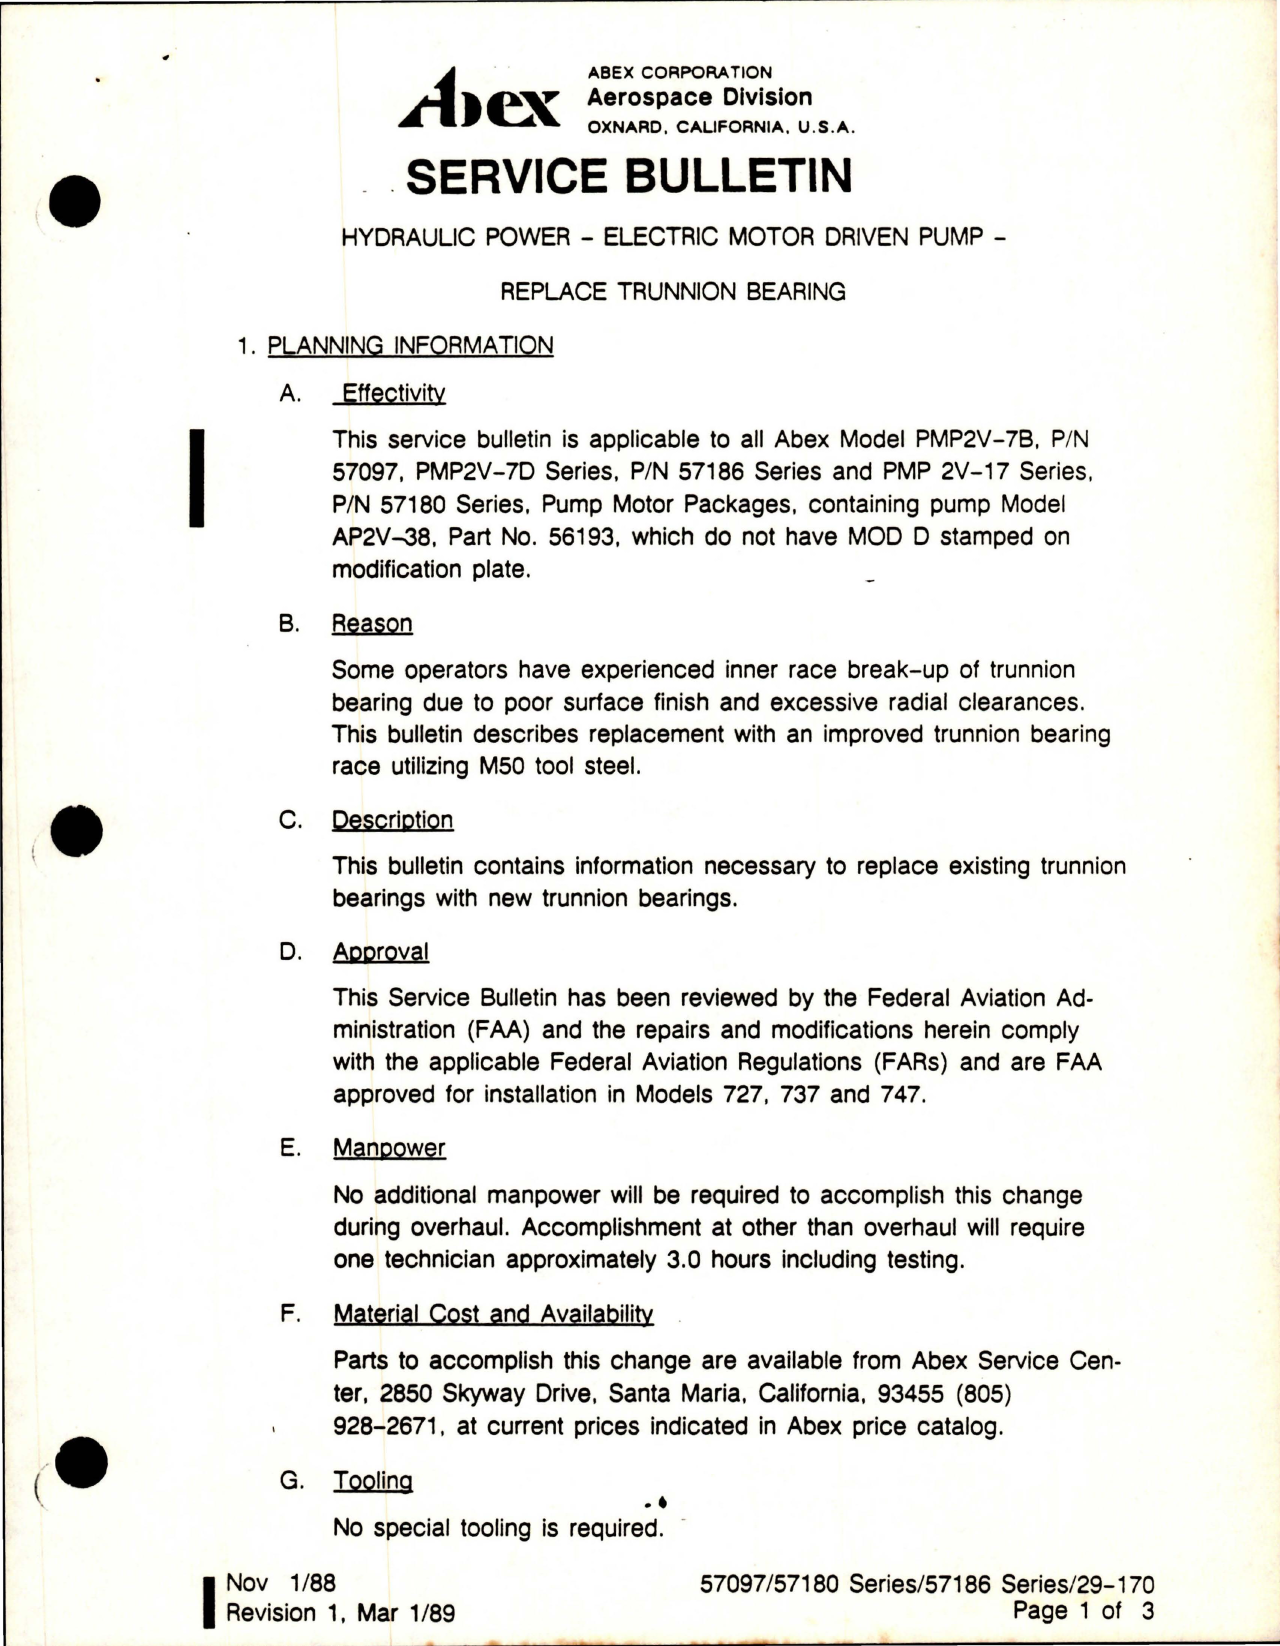 Sample page 1 from AirCorps Library document: Abex Hydraulic Power Electric Motor Driven Pump - Replace Trunnion Bearing - Revision 1